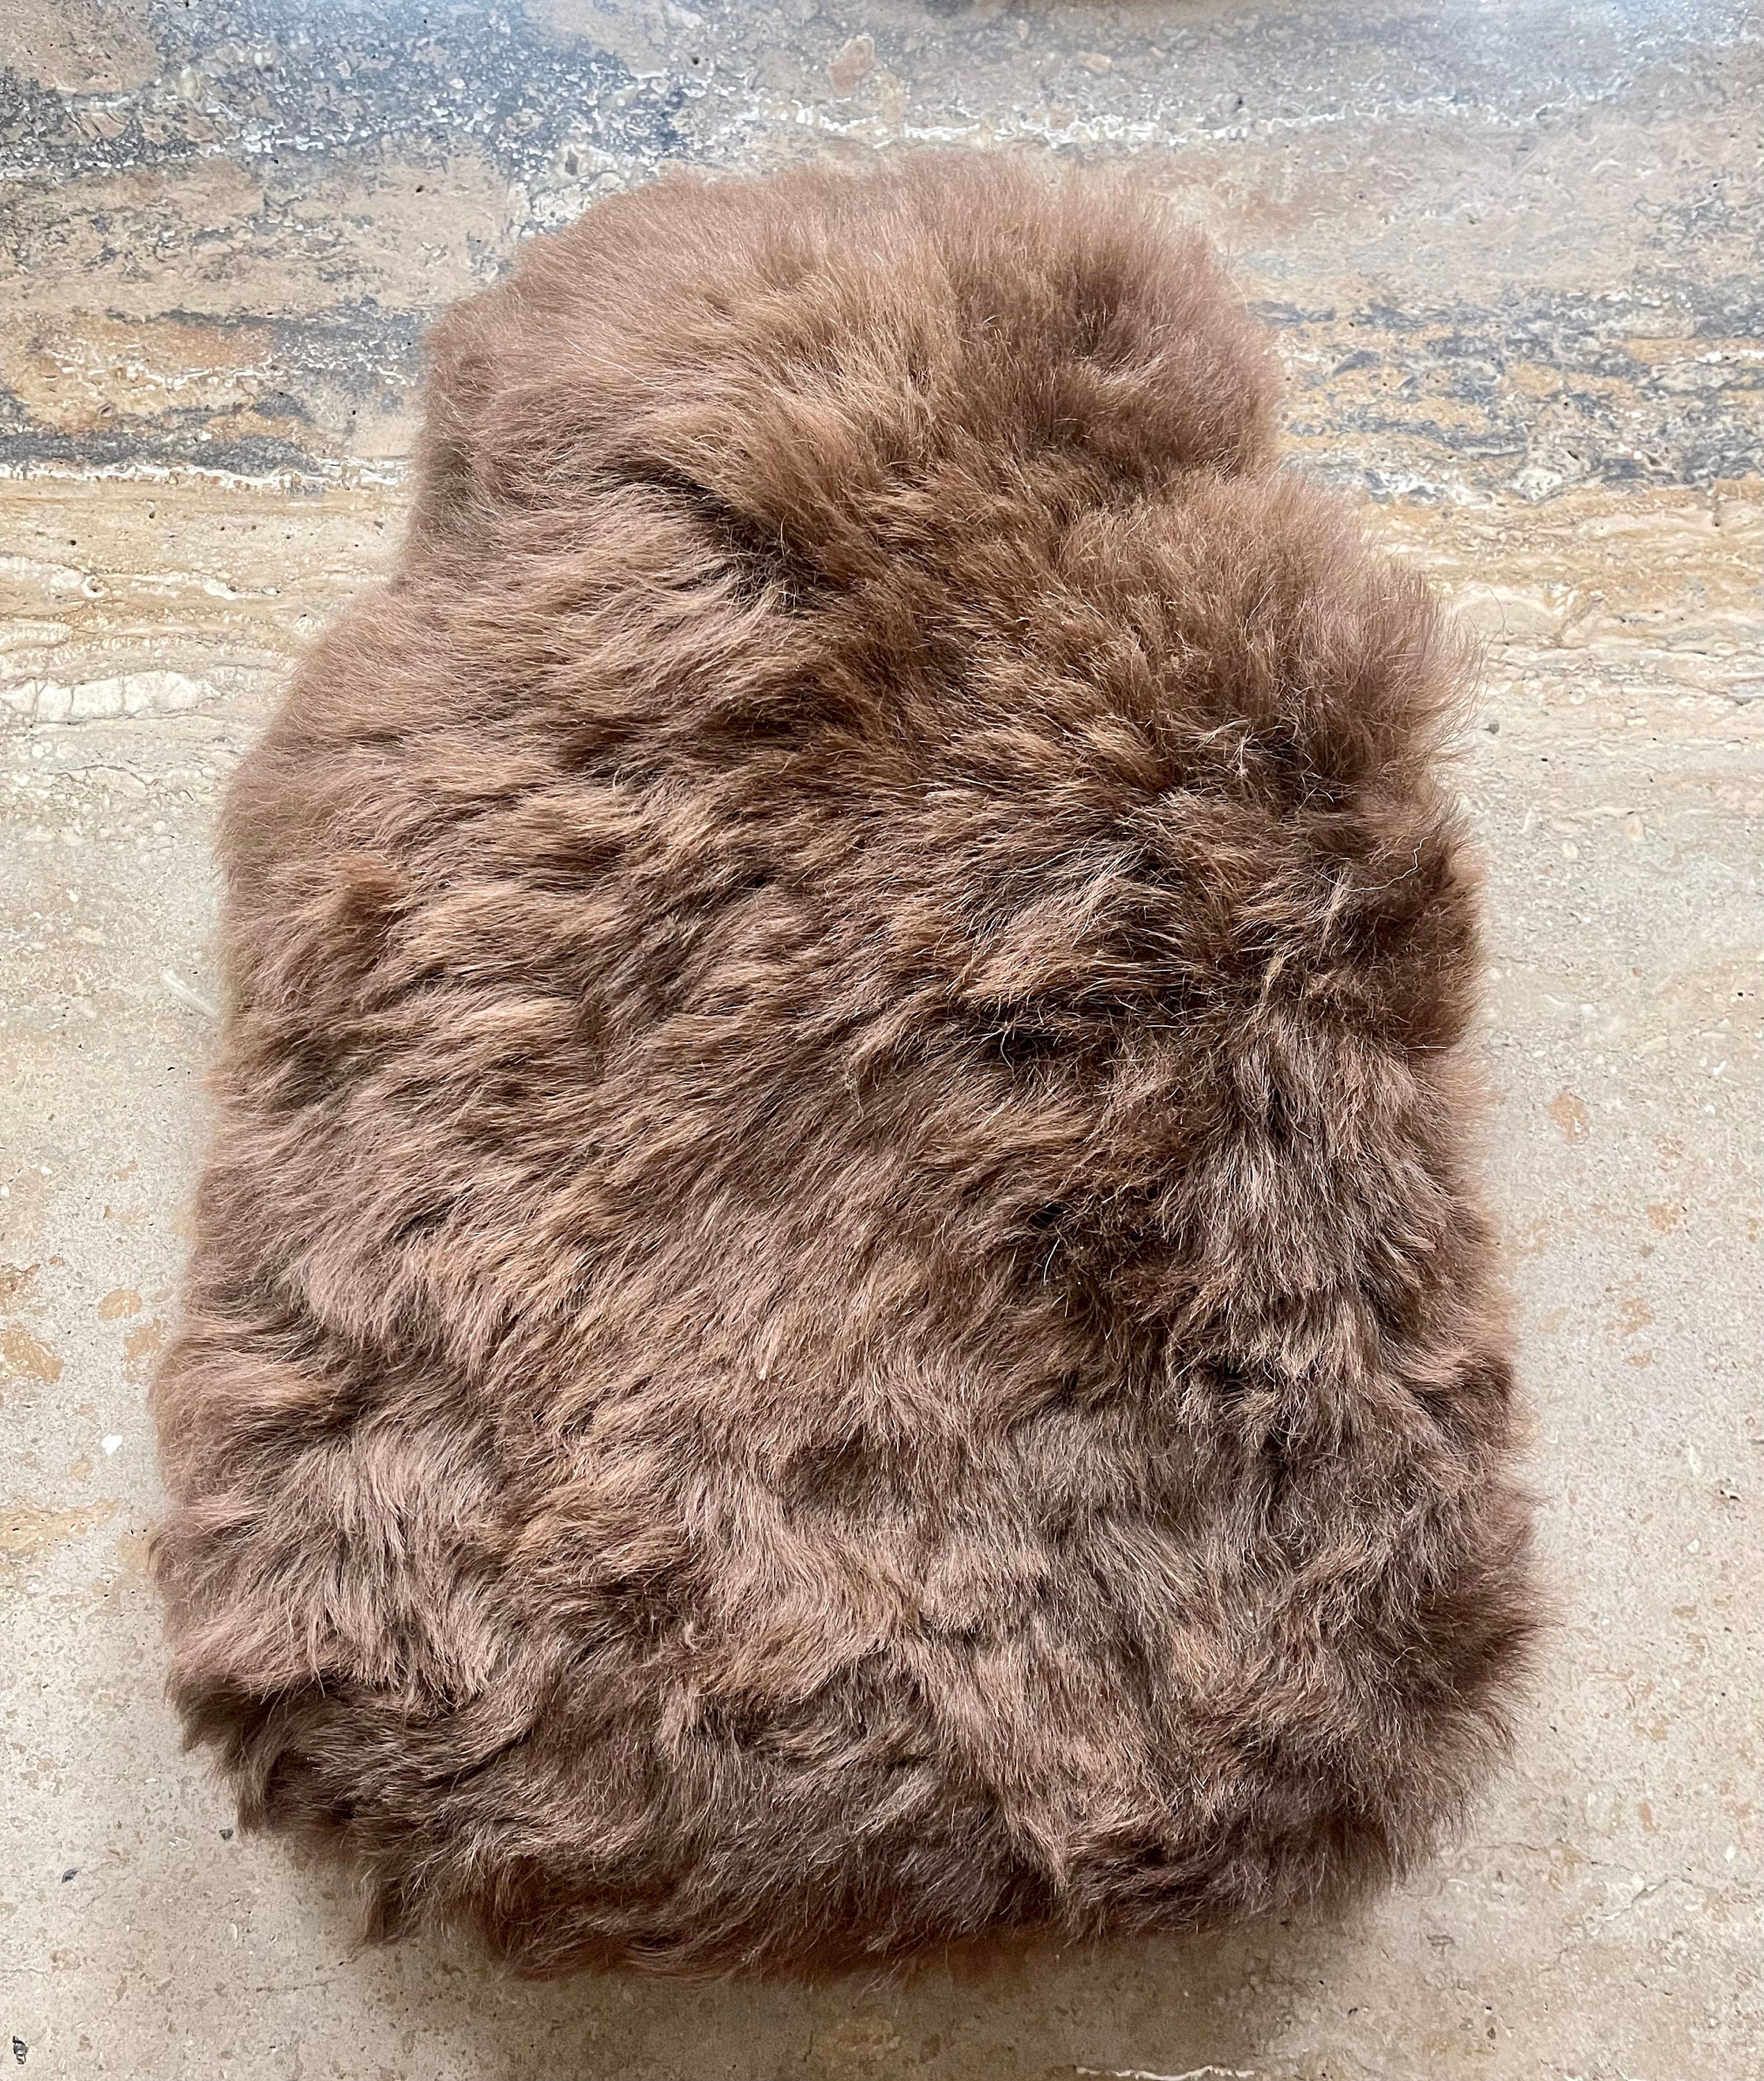 Luxurious Genuine Icelandic Sheepskin Hot Water Bottle Cover 'hottie' Heat  Pad White/ivory, Grey, Baby Pink, Taupe, Brown Fur on Both Sides 